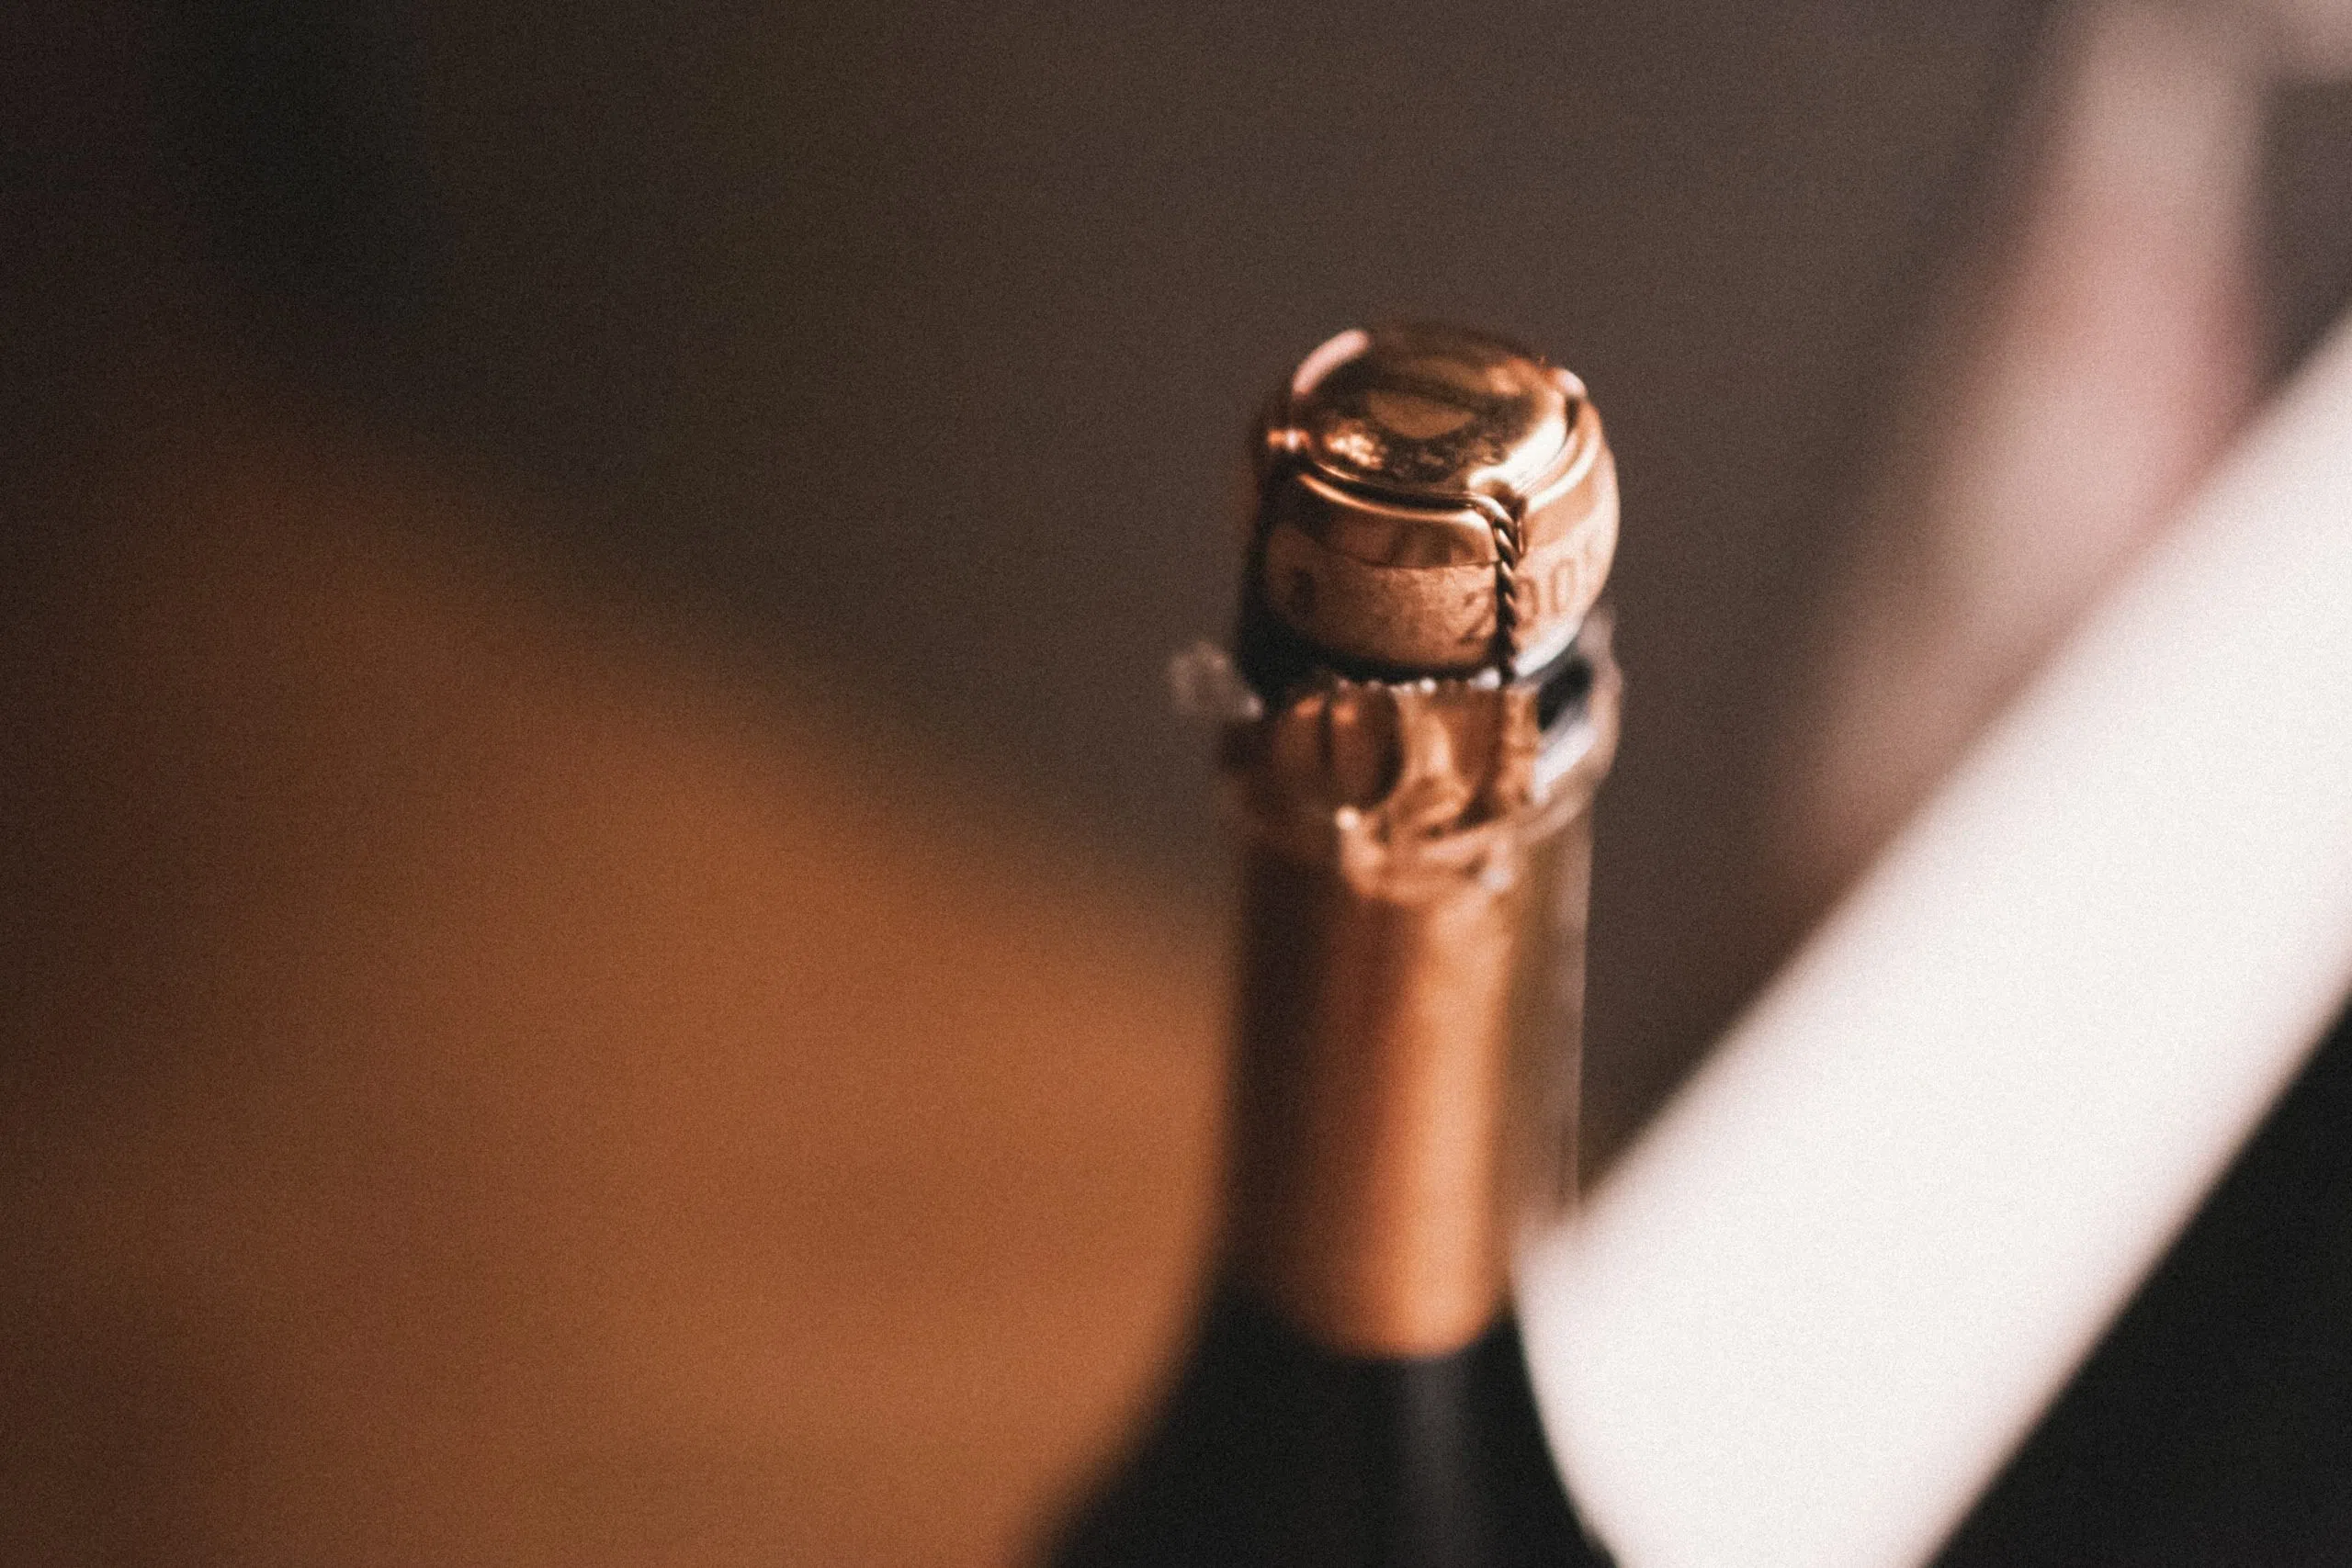 Partygoers warned of risk to sight from 50mph champagne corks